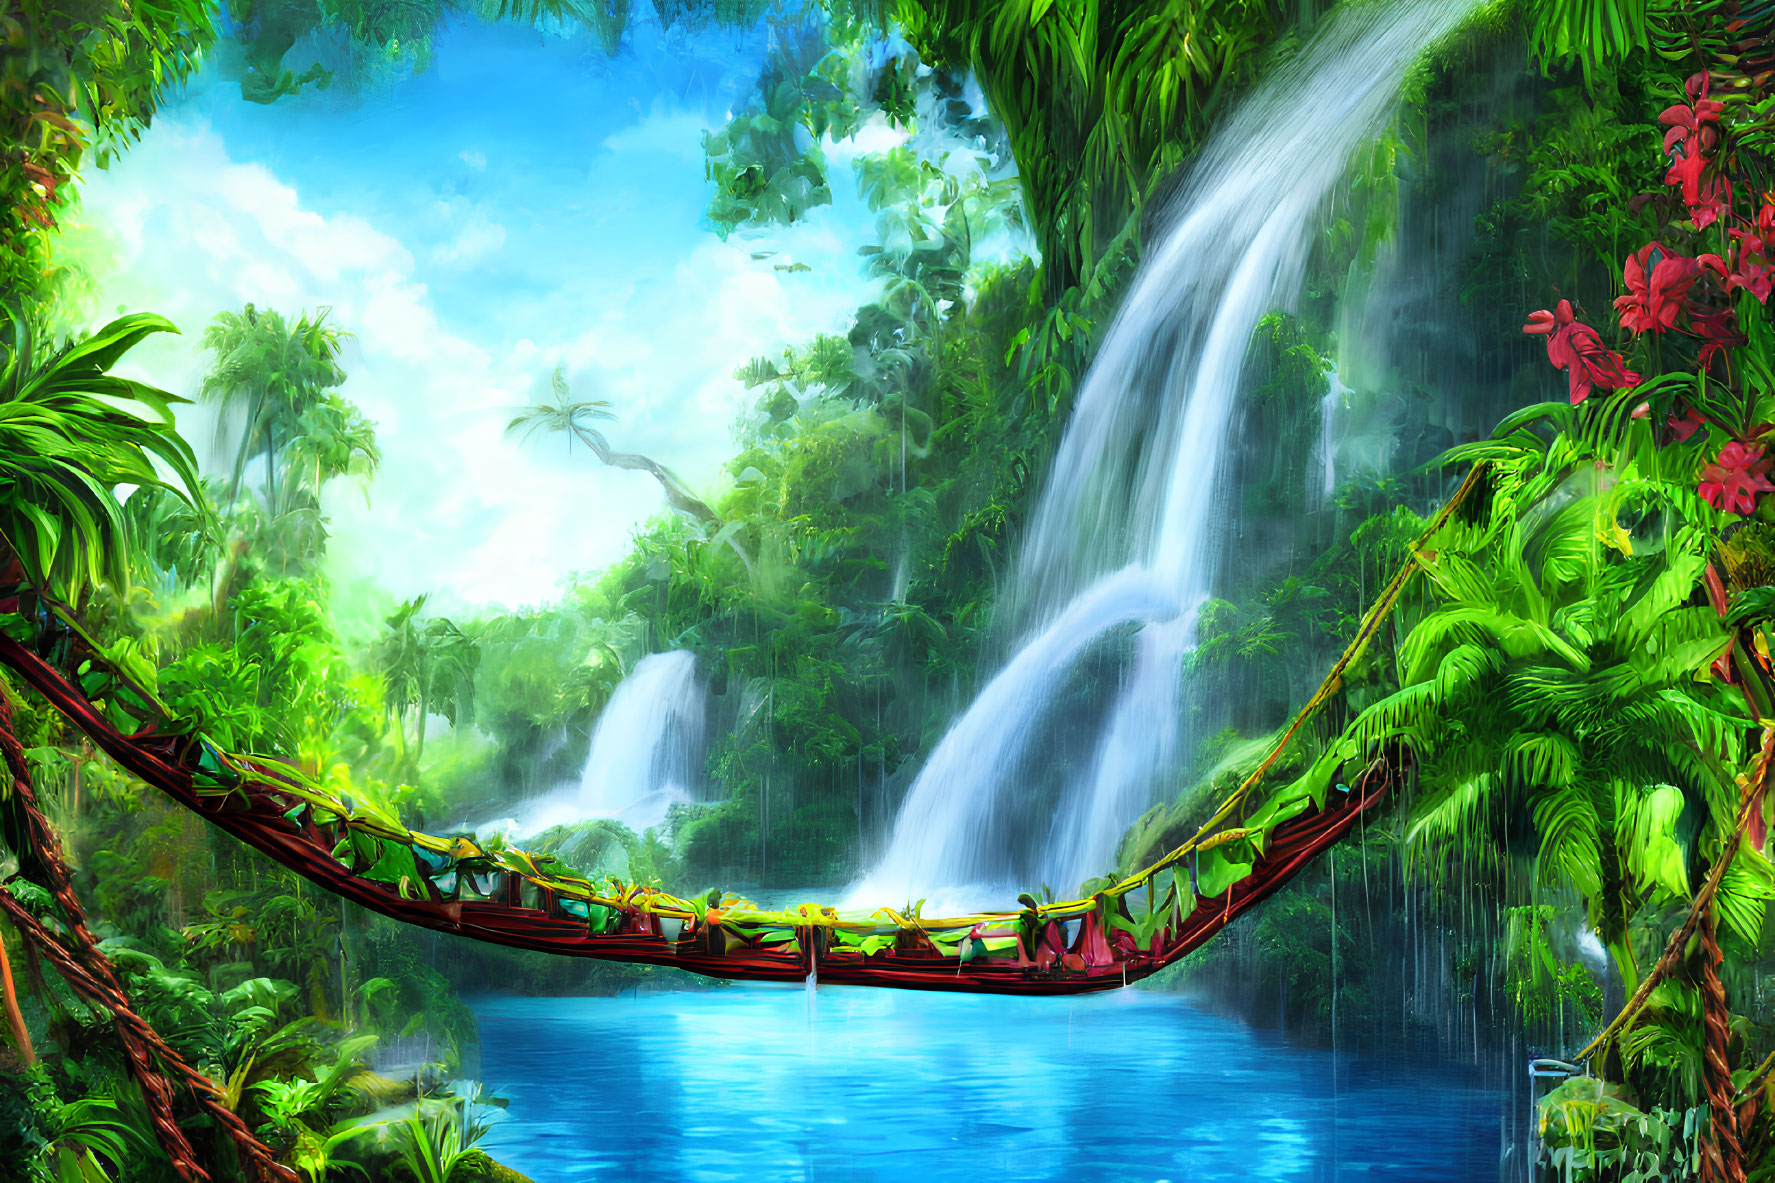 Tropical waterfall with hanging bridge, red flowers, and blue pond